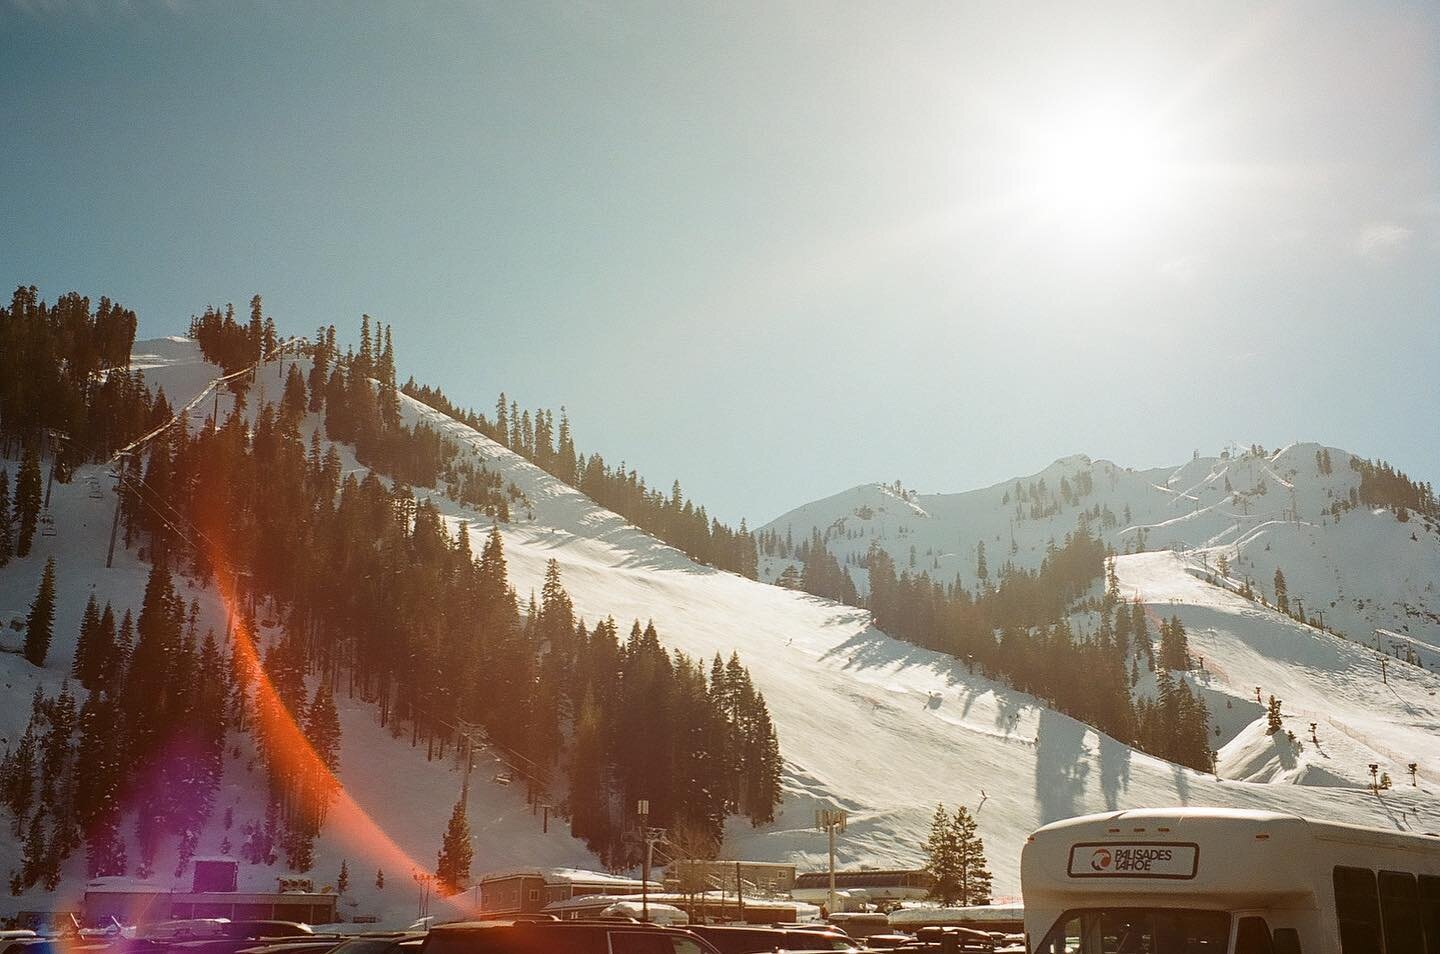 Last shot from the parking lot as my friends dragged me away. Cheers to skiing and film!

🎿

#kodakfilm #35mm #skibum #vanlife #skiing #palisadestahoe #photography #filmphotography #portra800 #kodakportra